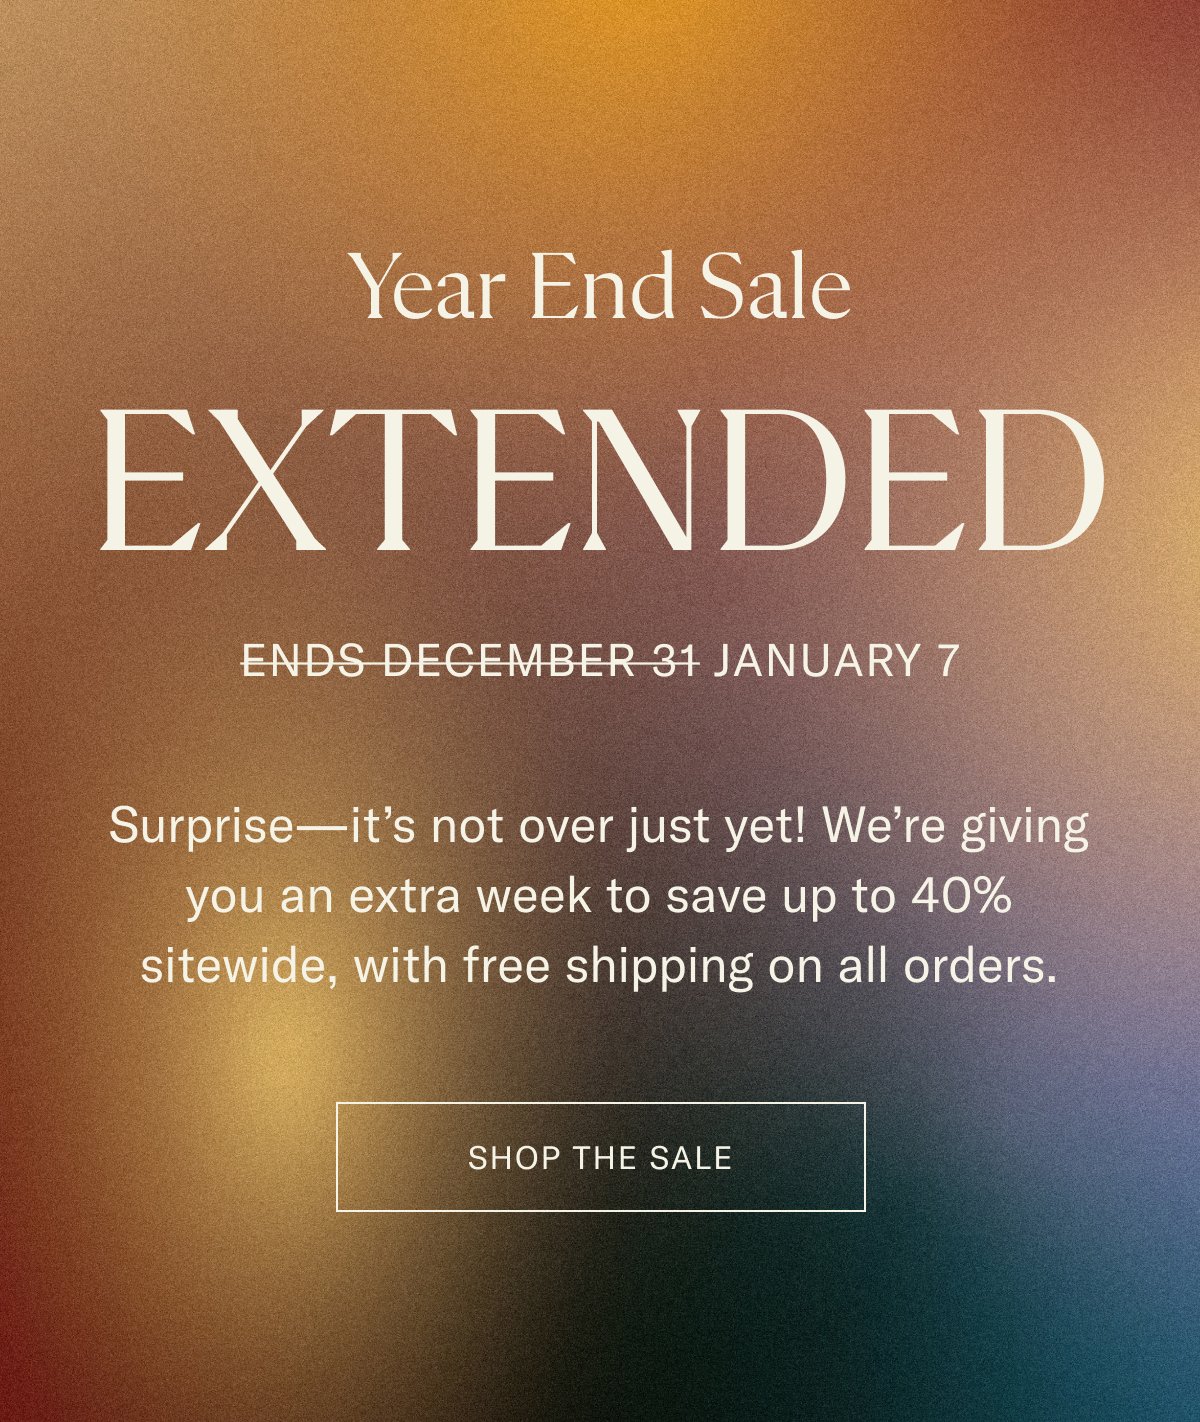 Year End Sale extended